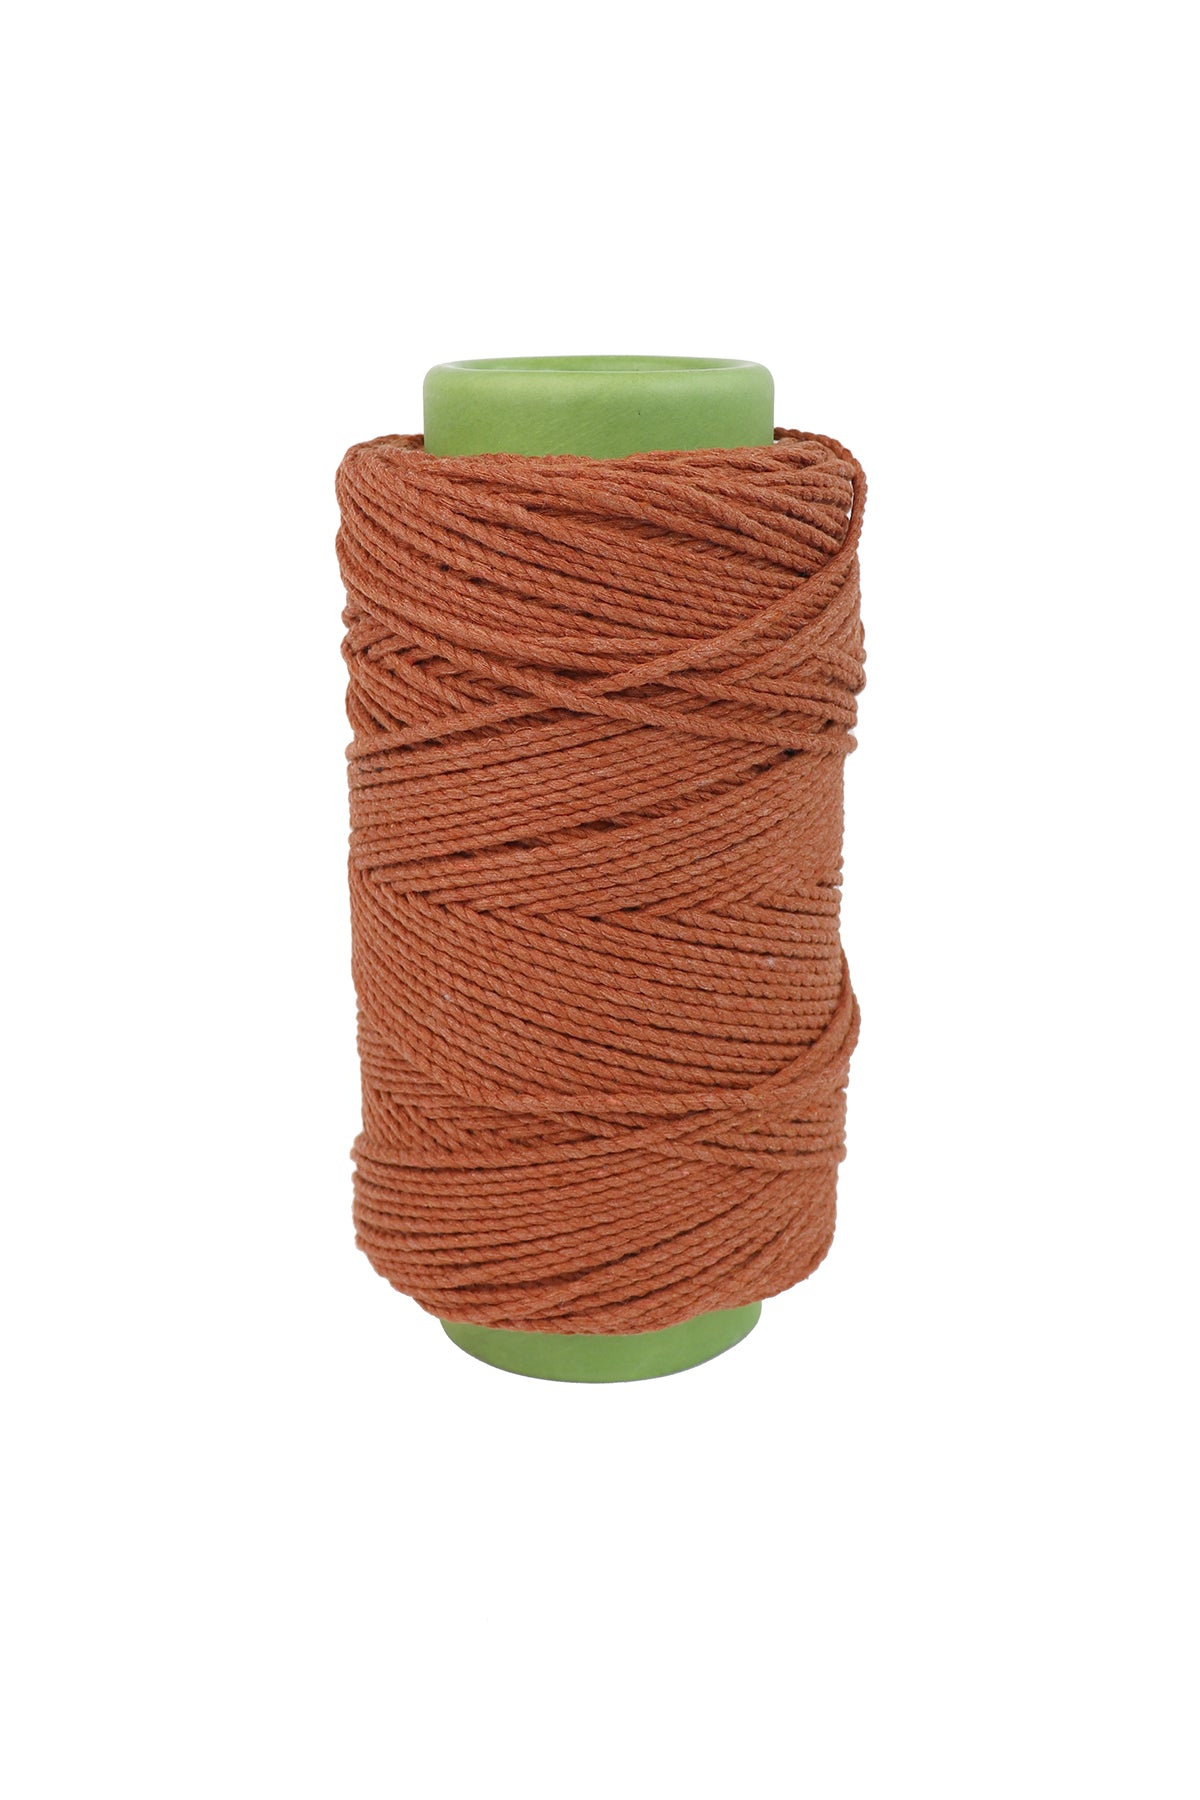 3mm String 23 Colours 100% RECYCLED Macrame String/1000 Ft/cotton